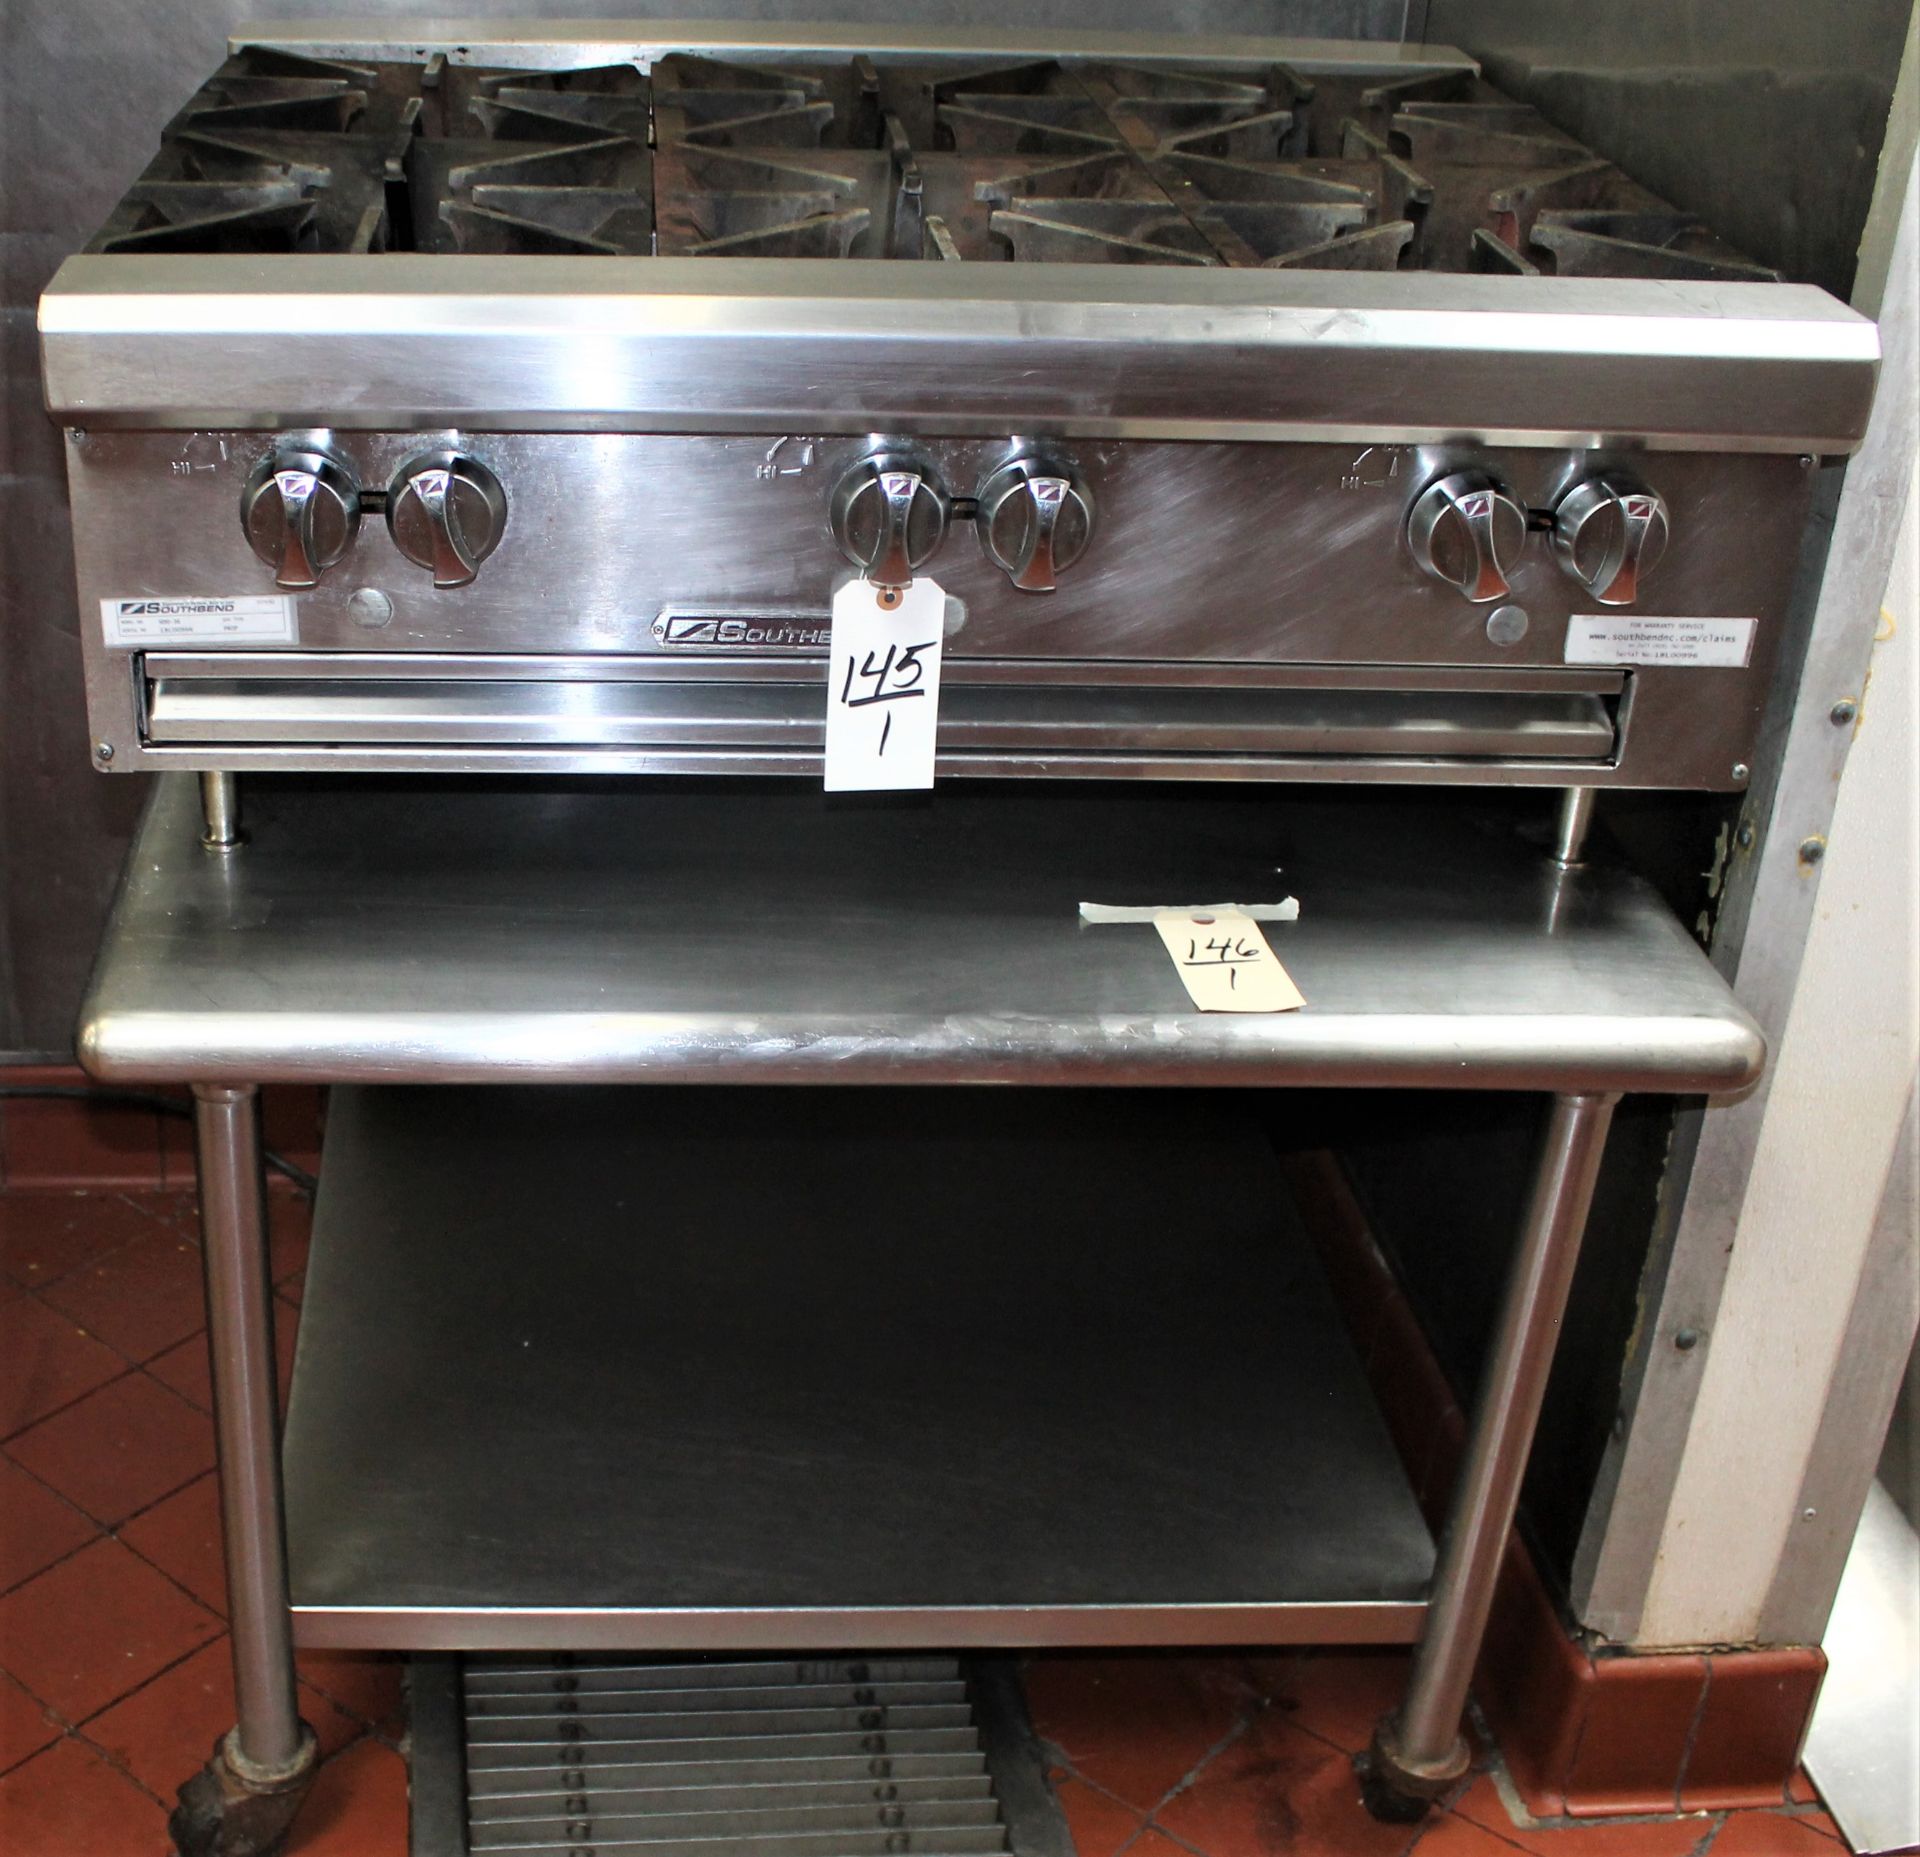 SOUTH BEND 6BRNR COOKTOP STOVE